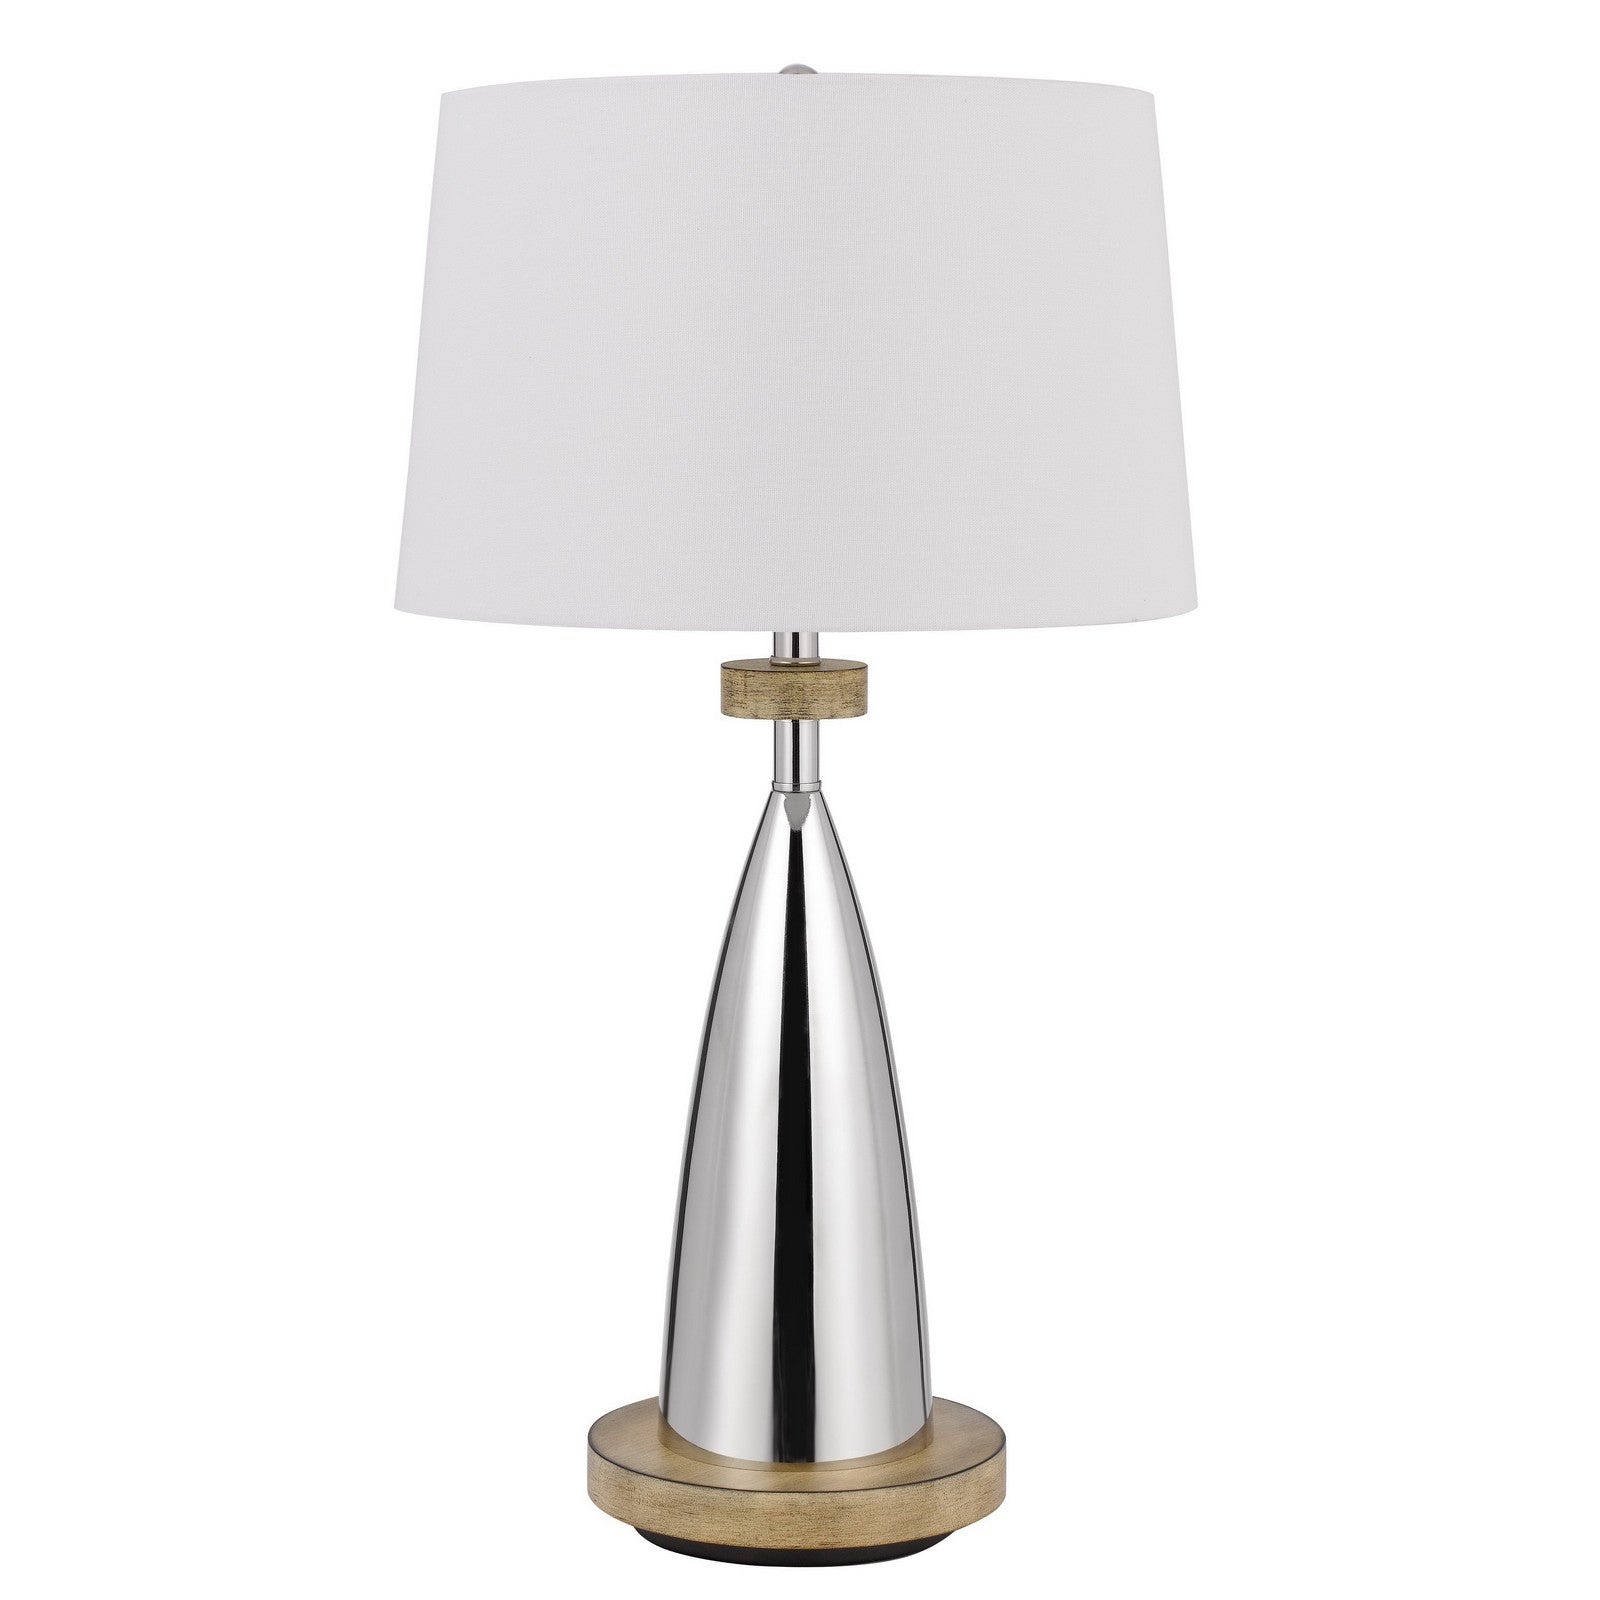 31" Silver Metallic Metal Usb Table Lamp With White Empire Shade